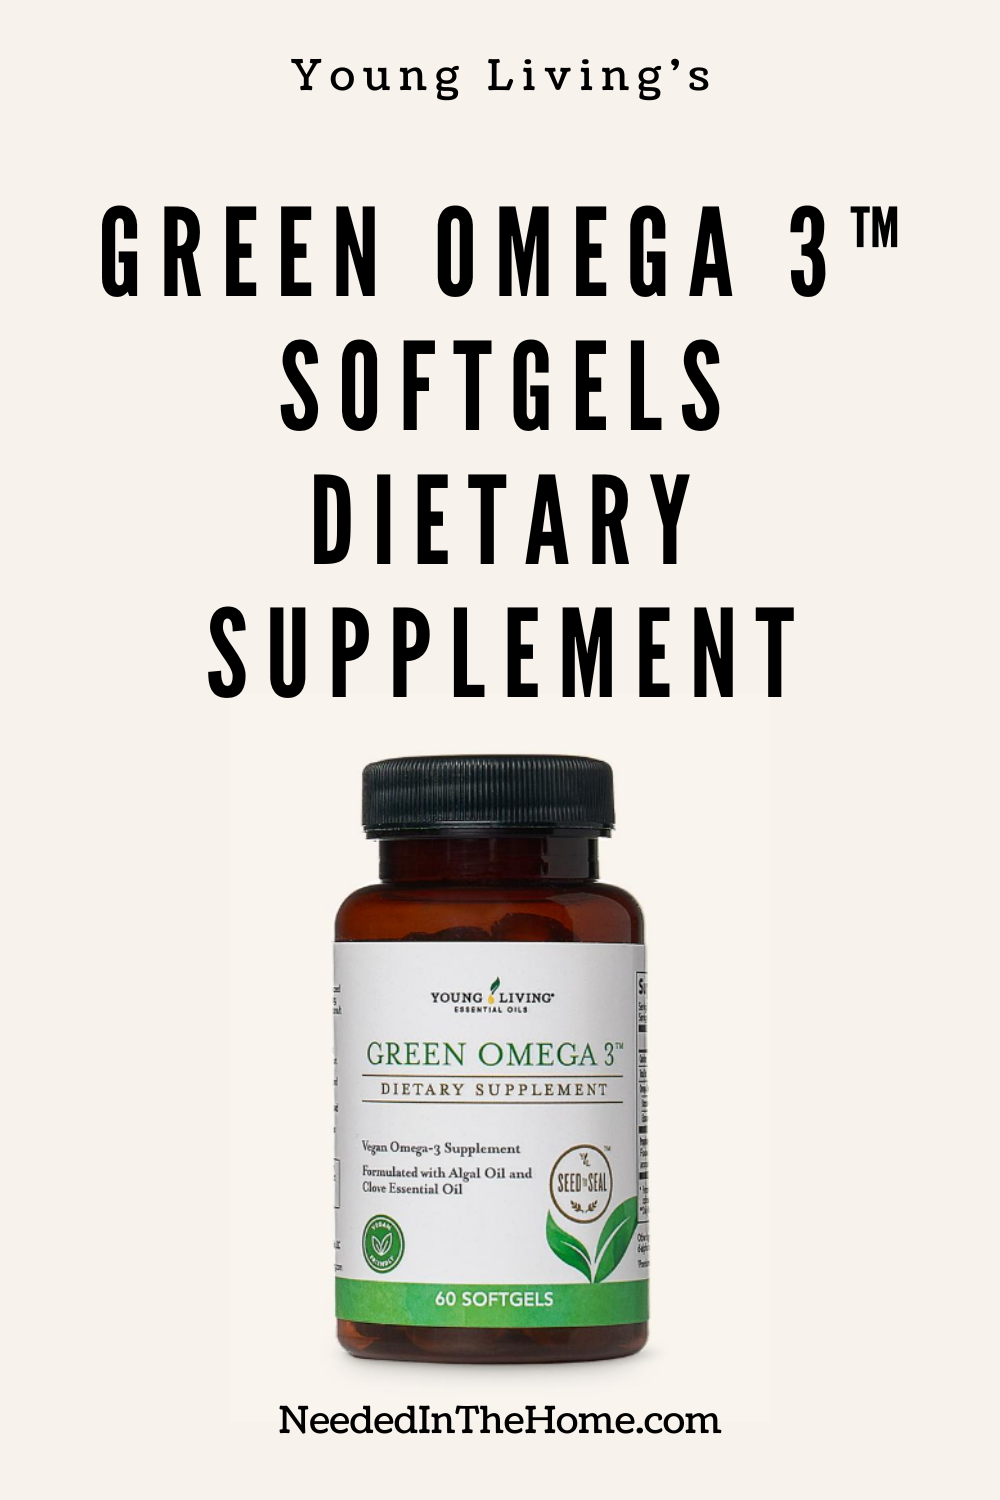 young living's green omega 3 softgels dietary supplement bottle neededinthehome